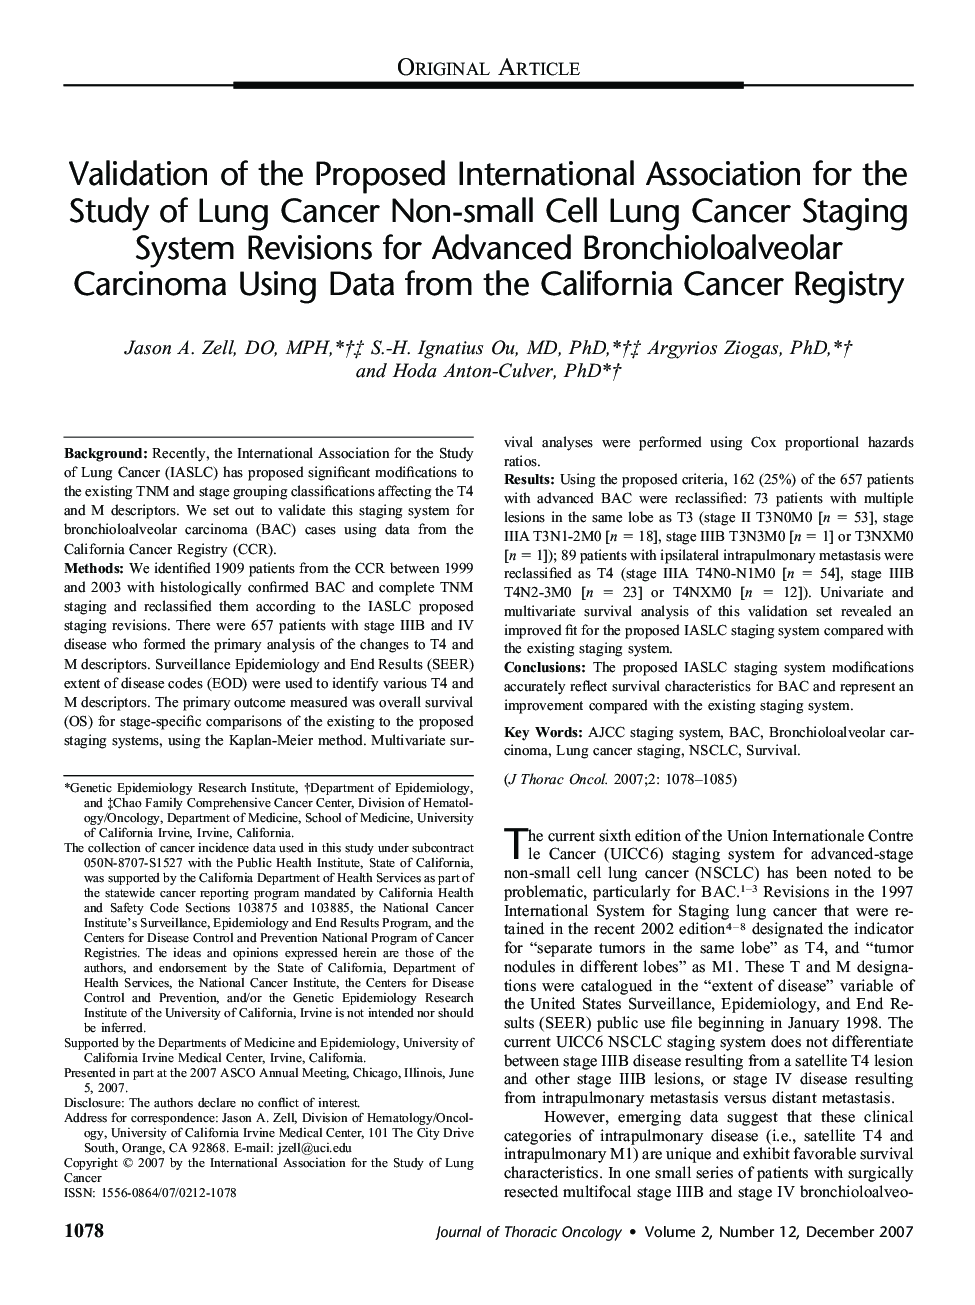 Validation of the Proposed International Association for the Study of Lung Cancer Non-small Cell Lung Cancer Staging System Revisions for Advanced Bronchioloalveolar Carcinoma Using Data from the California Cancer Registry